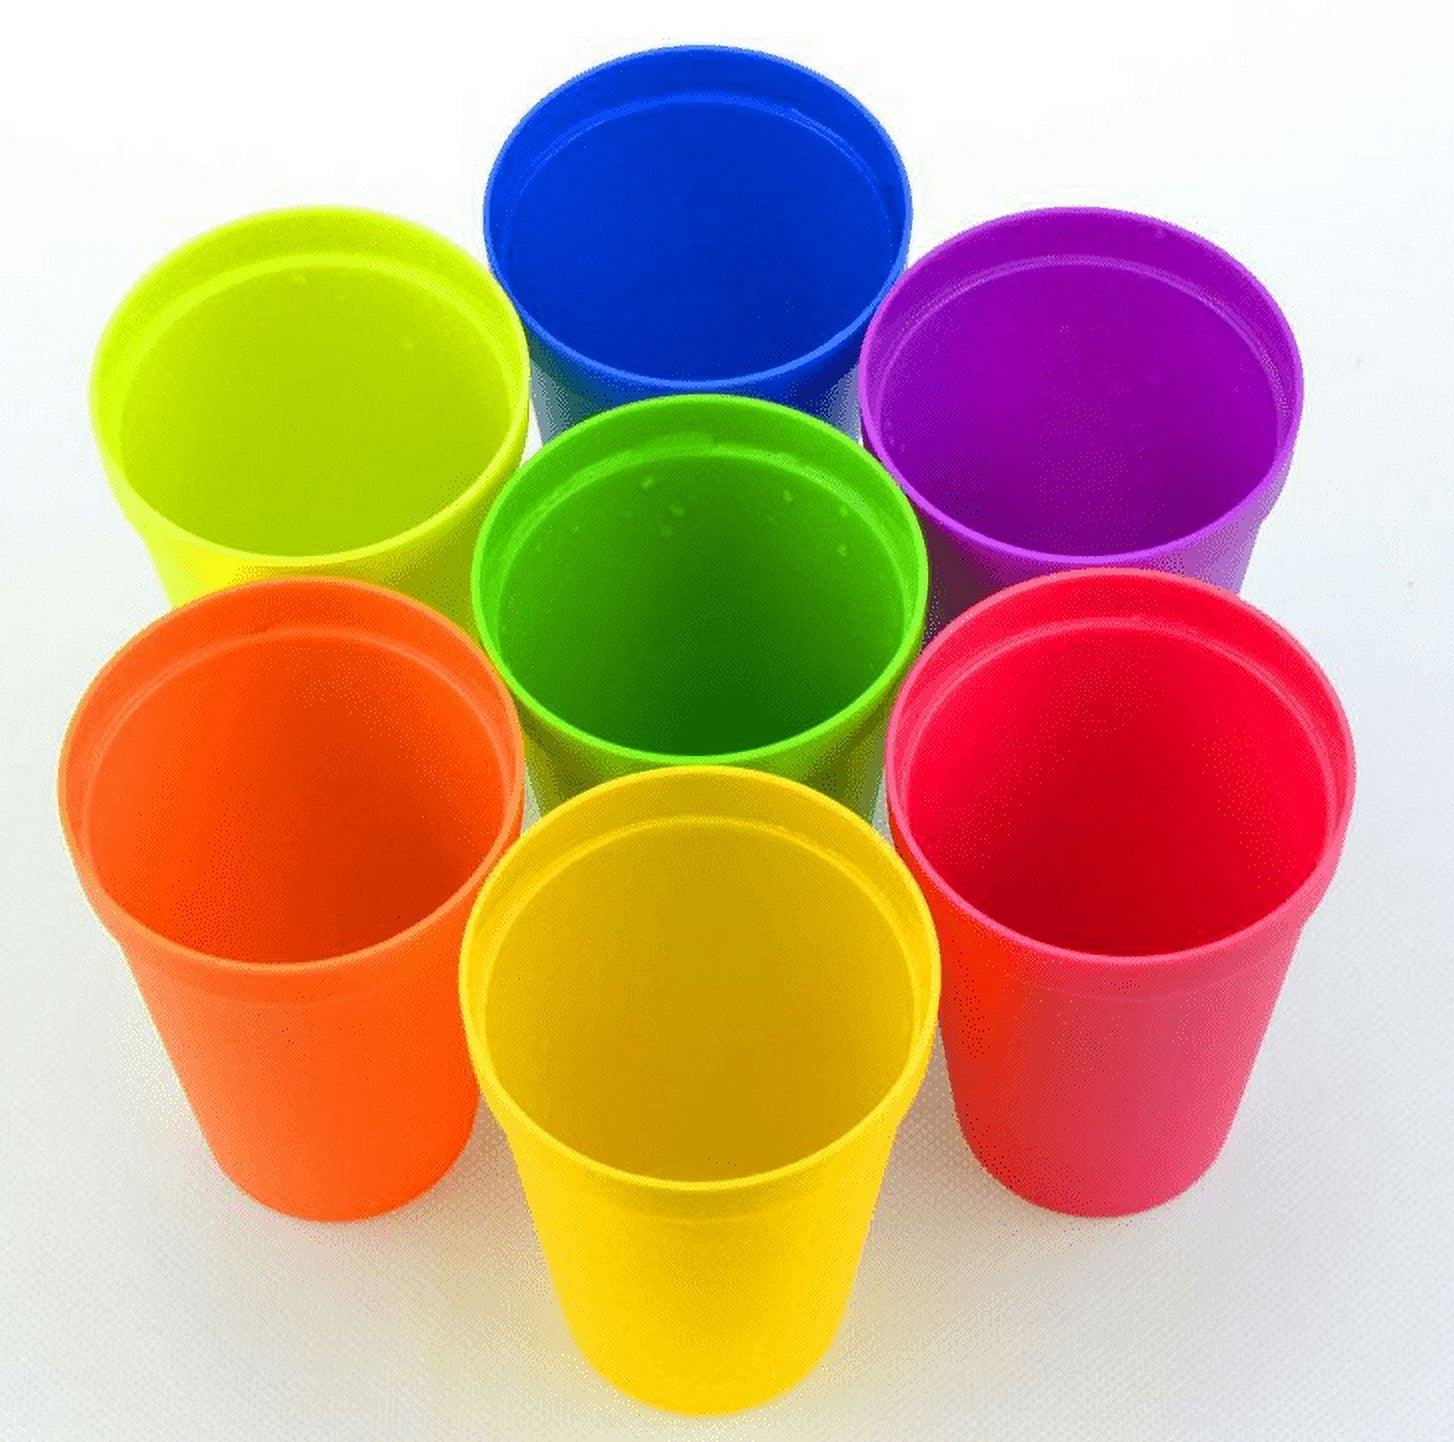 Eccliy Toddler Cups Kids Cups 8 oz Plastic Cups Reusable Cups Unbreakable  Plastic Drinking Cups Tumb…See more Eccliy Toddler Cups Kids Cups 8 oz